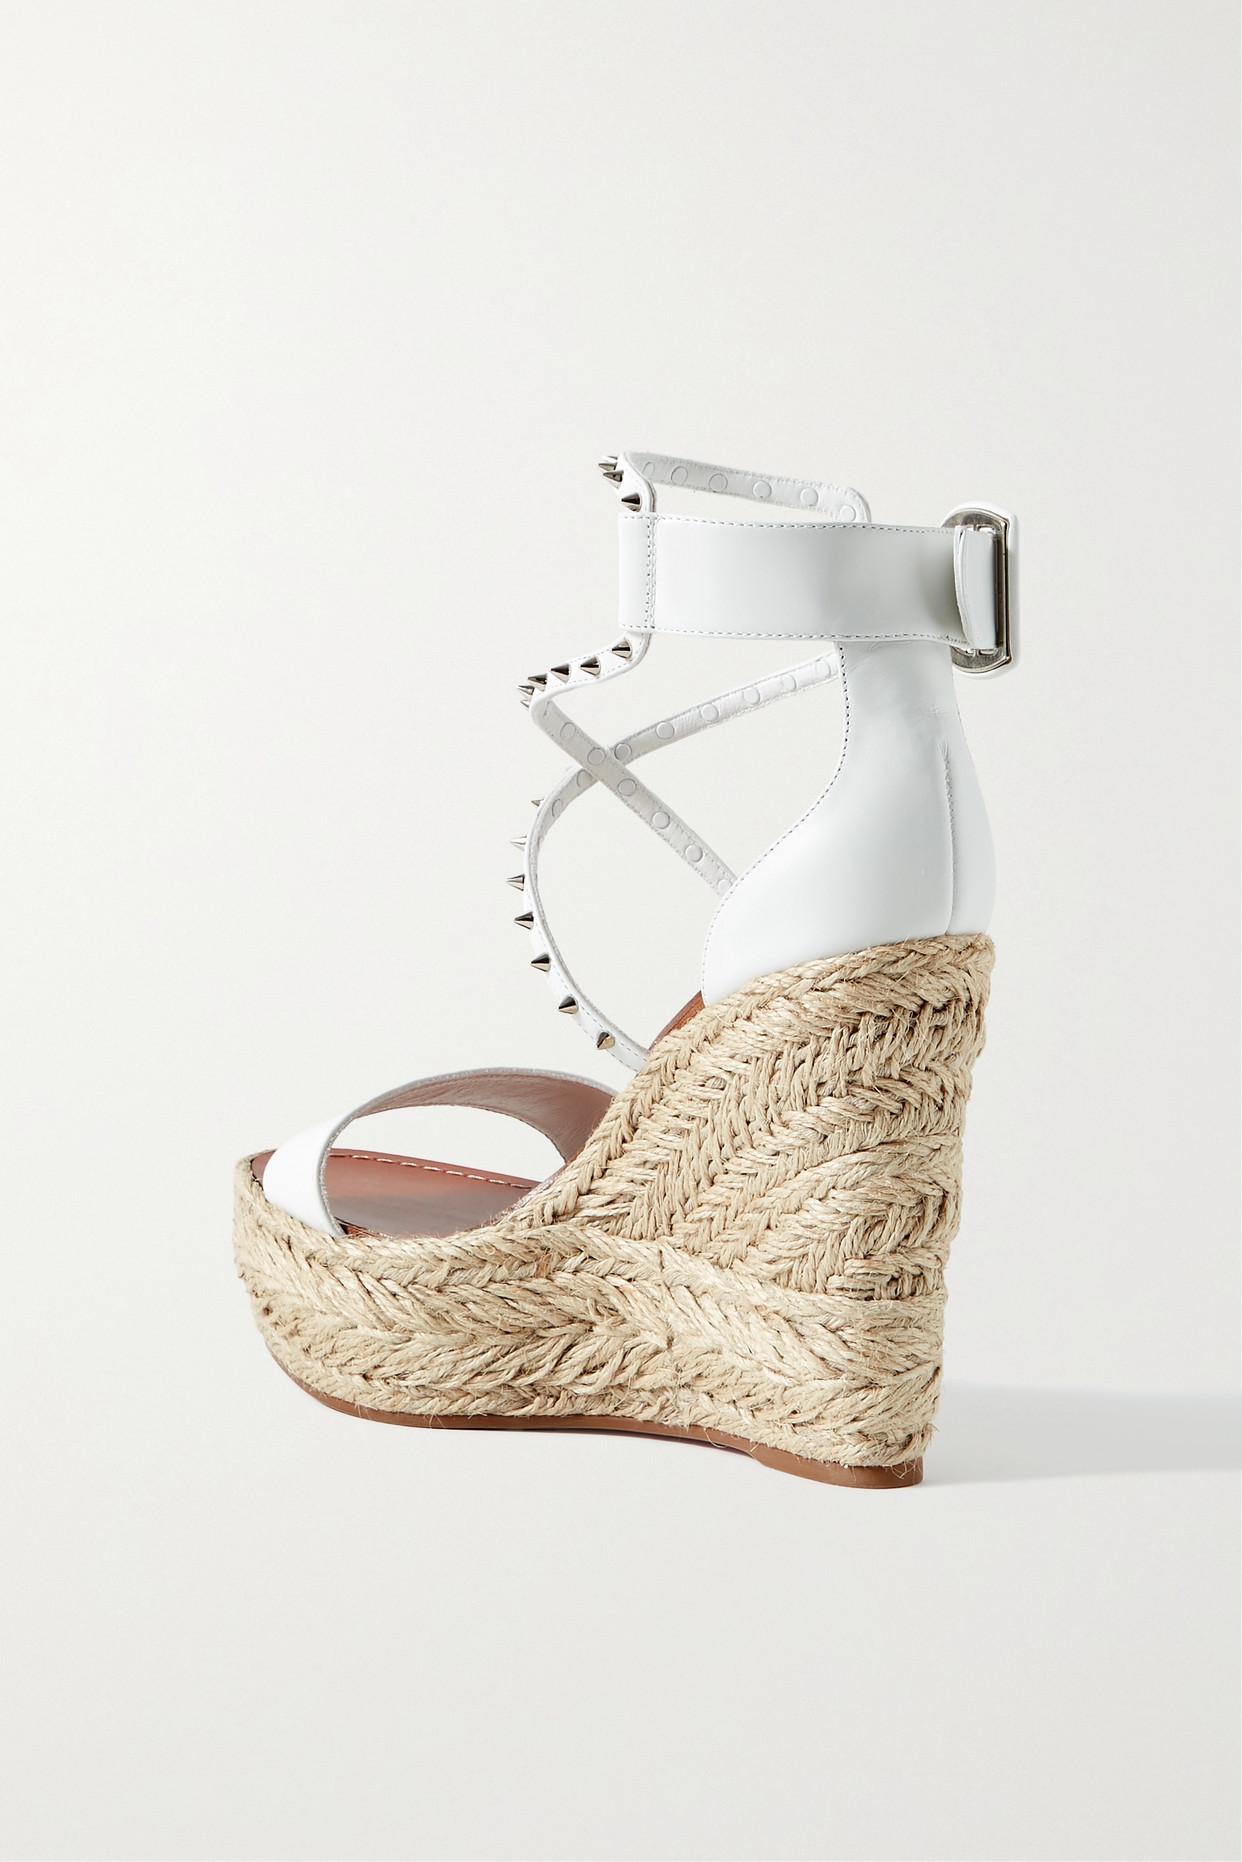 Christian Louboutin Chocazeppa 120 Studded Leather Espadrille Wedge Sandals  in Natural | Lyst